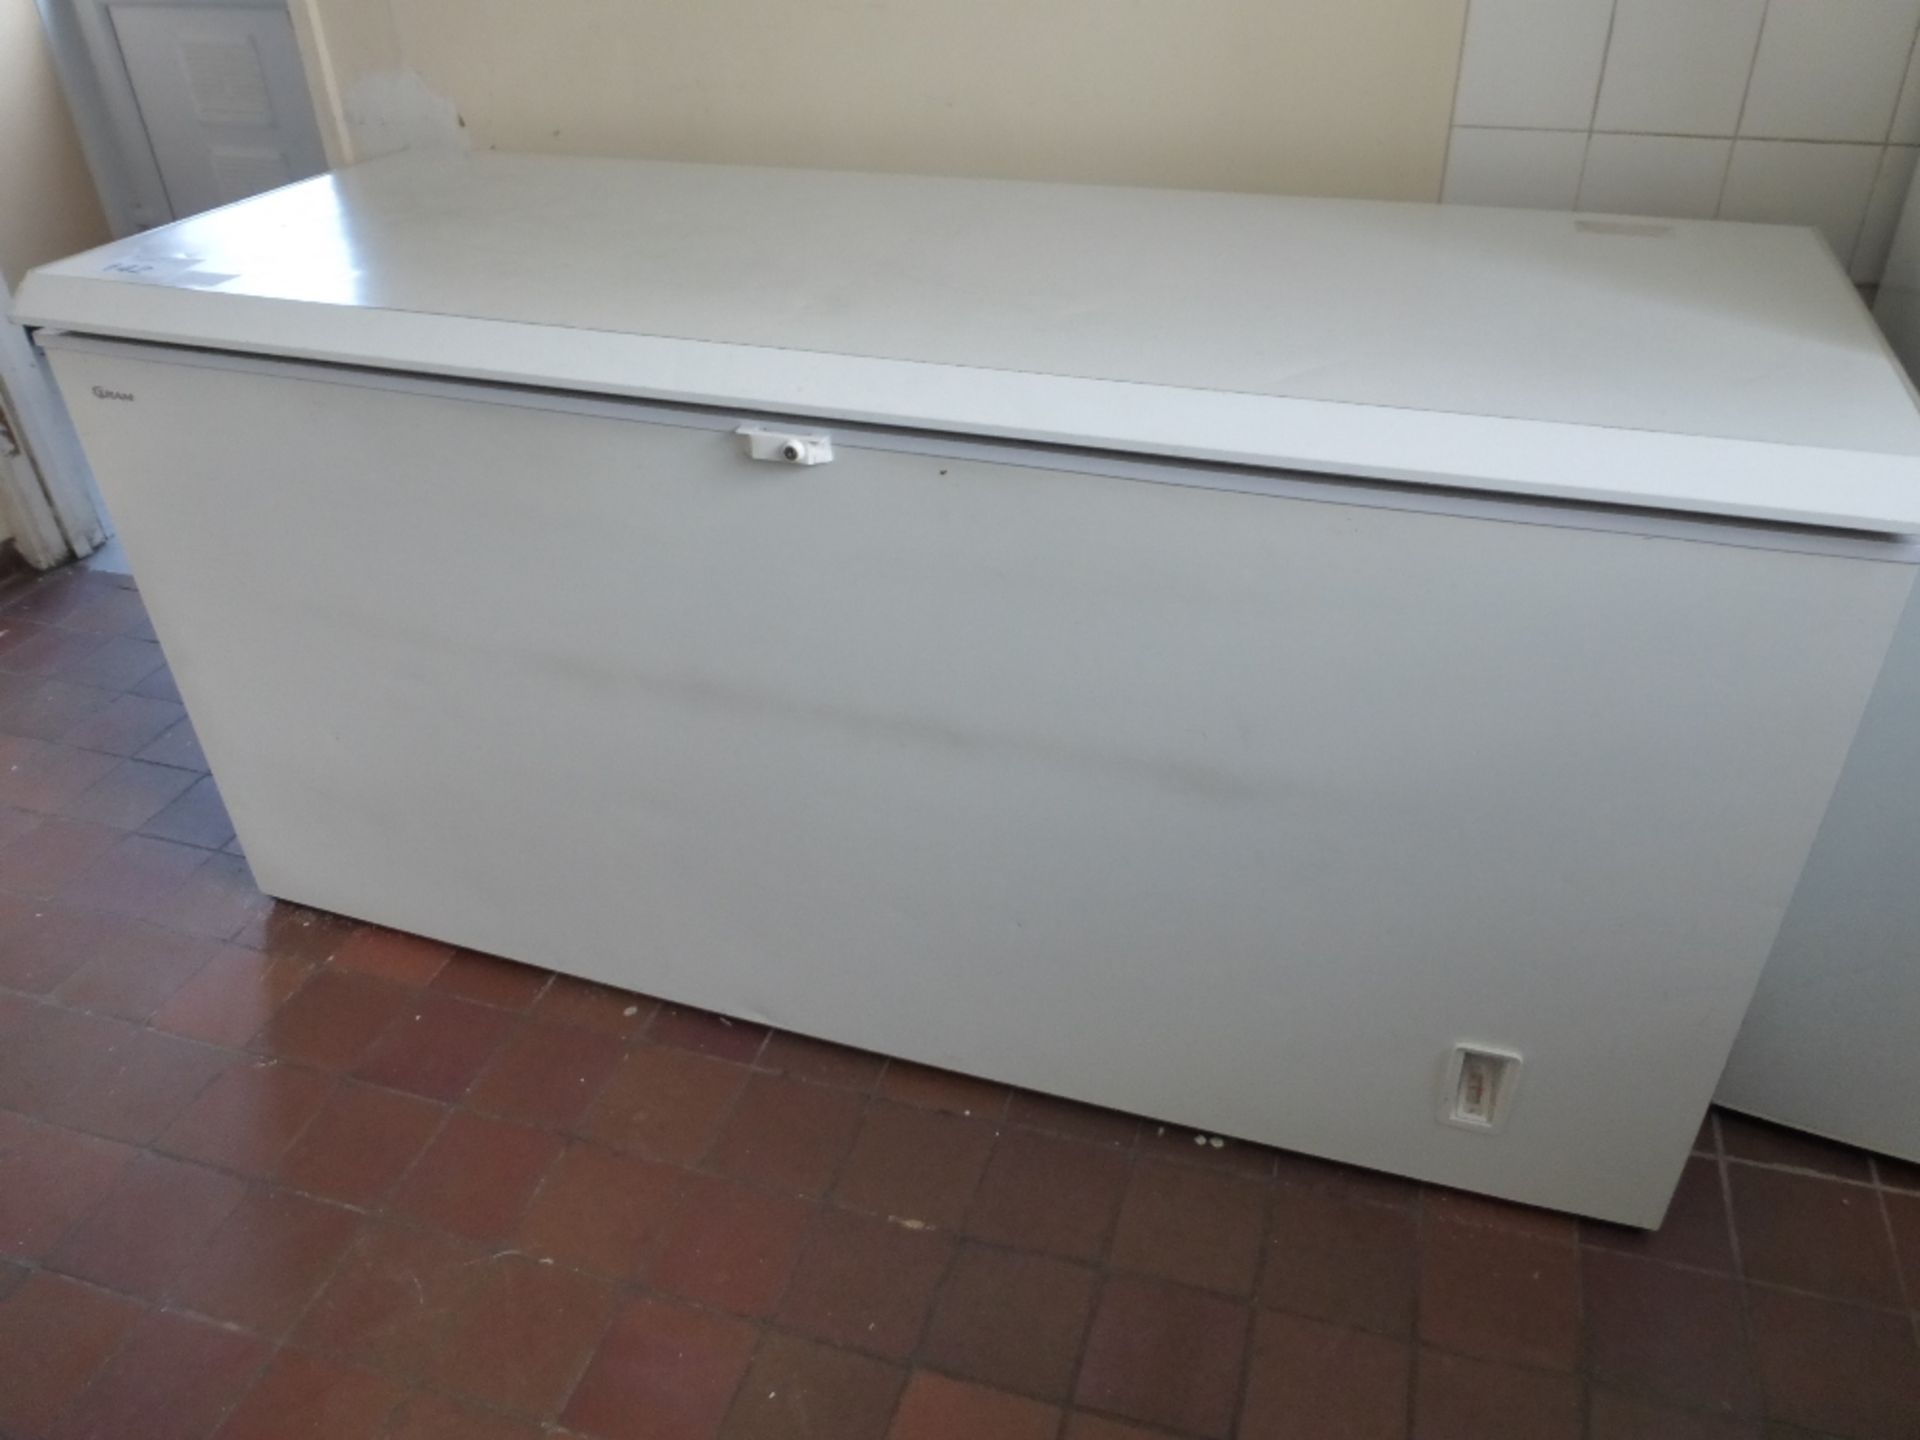 1 Gram domestic chest freezer type: CF610 (located in kitchen area)